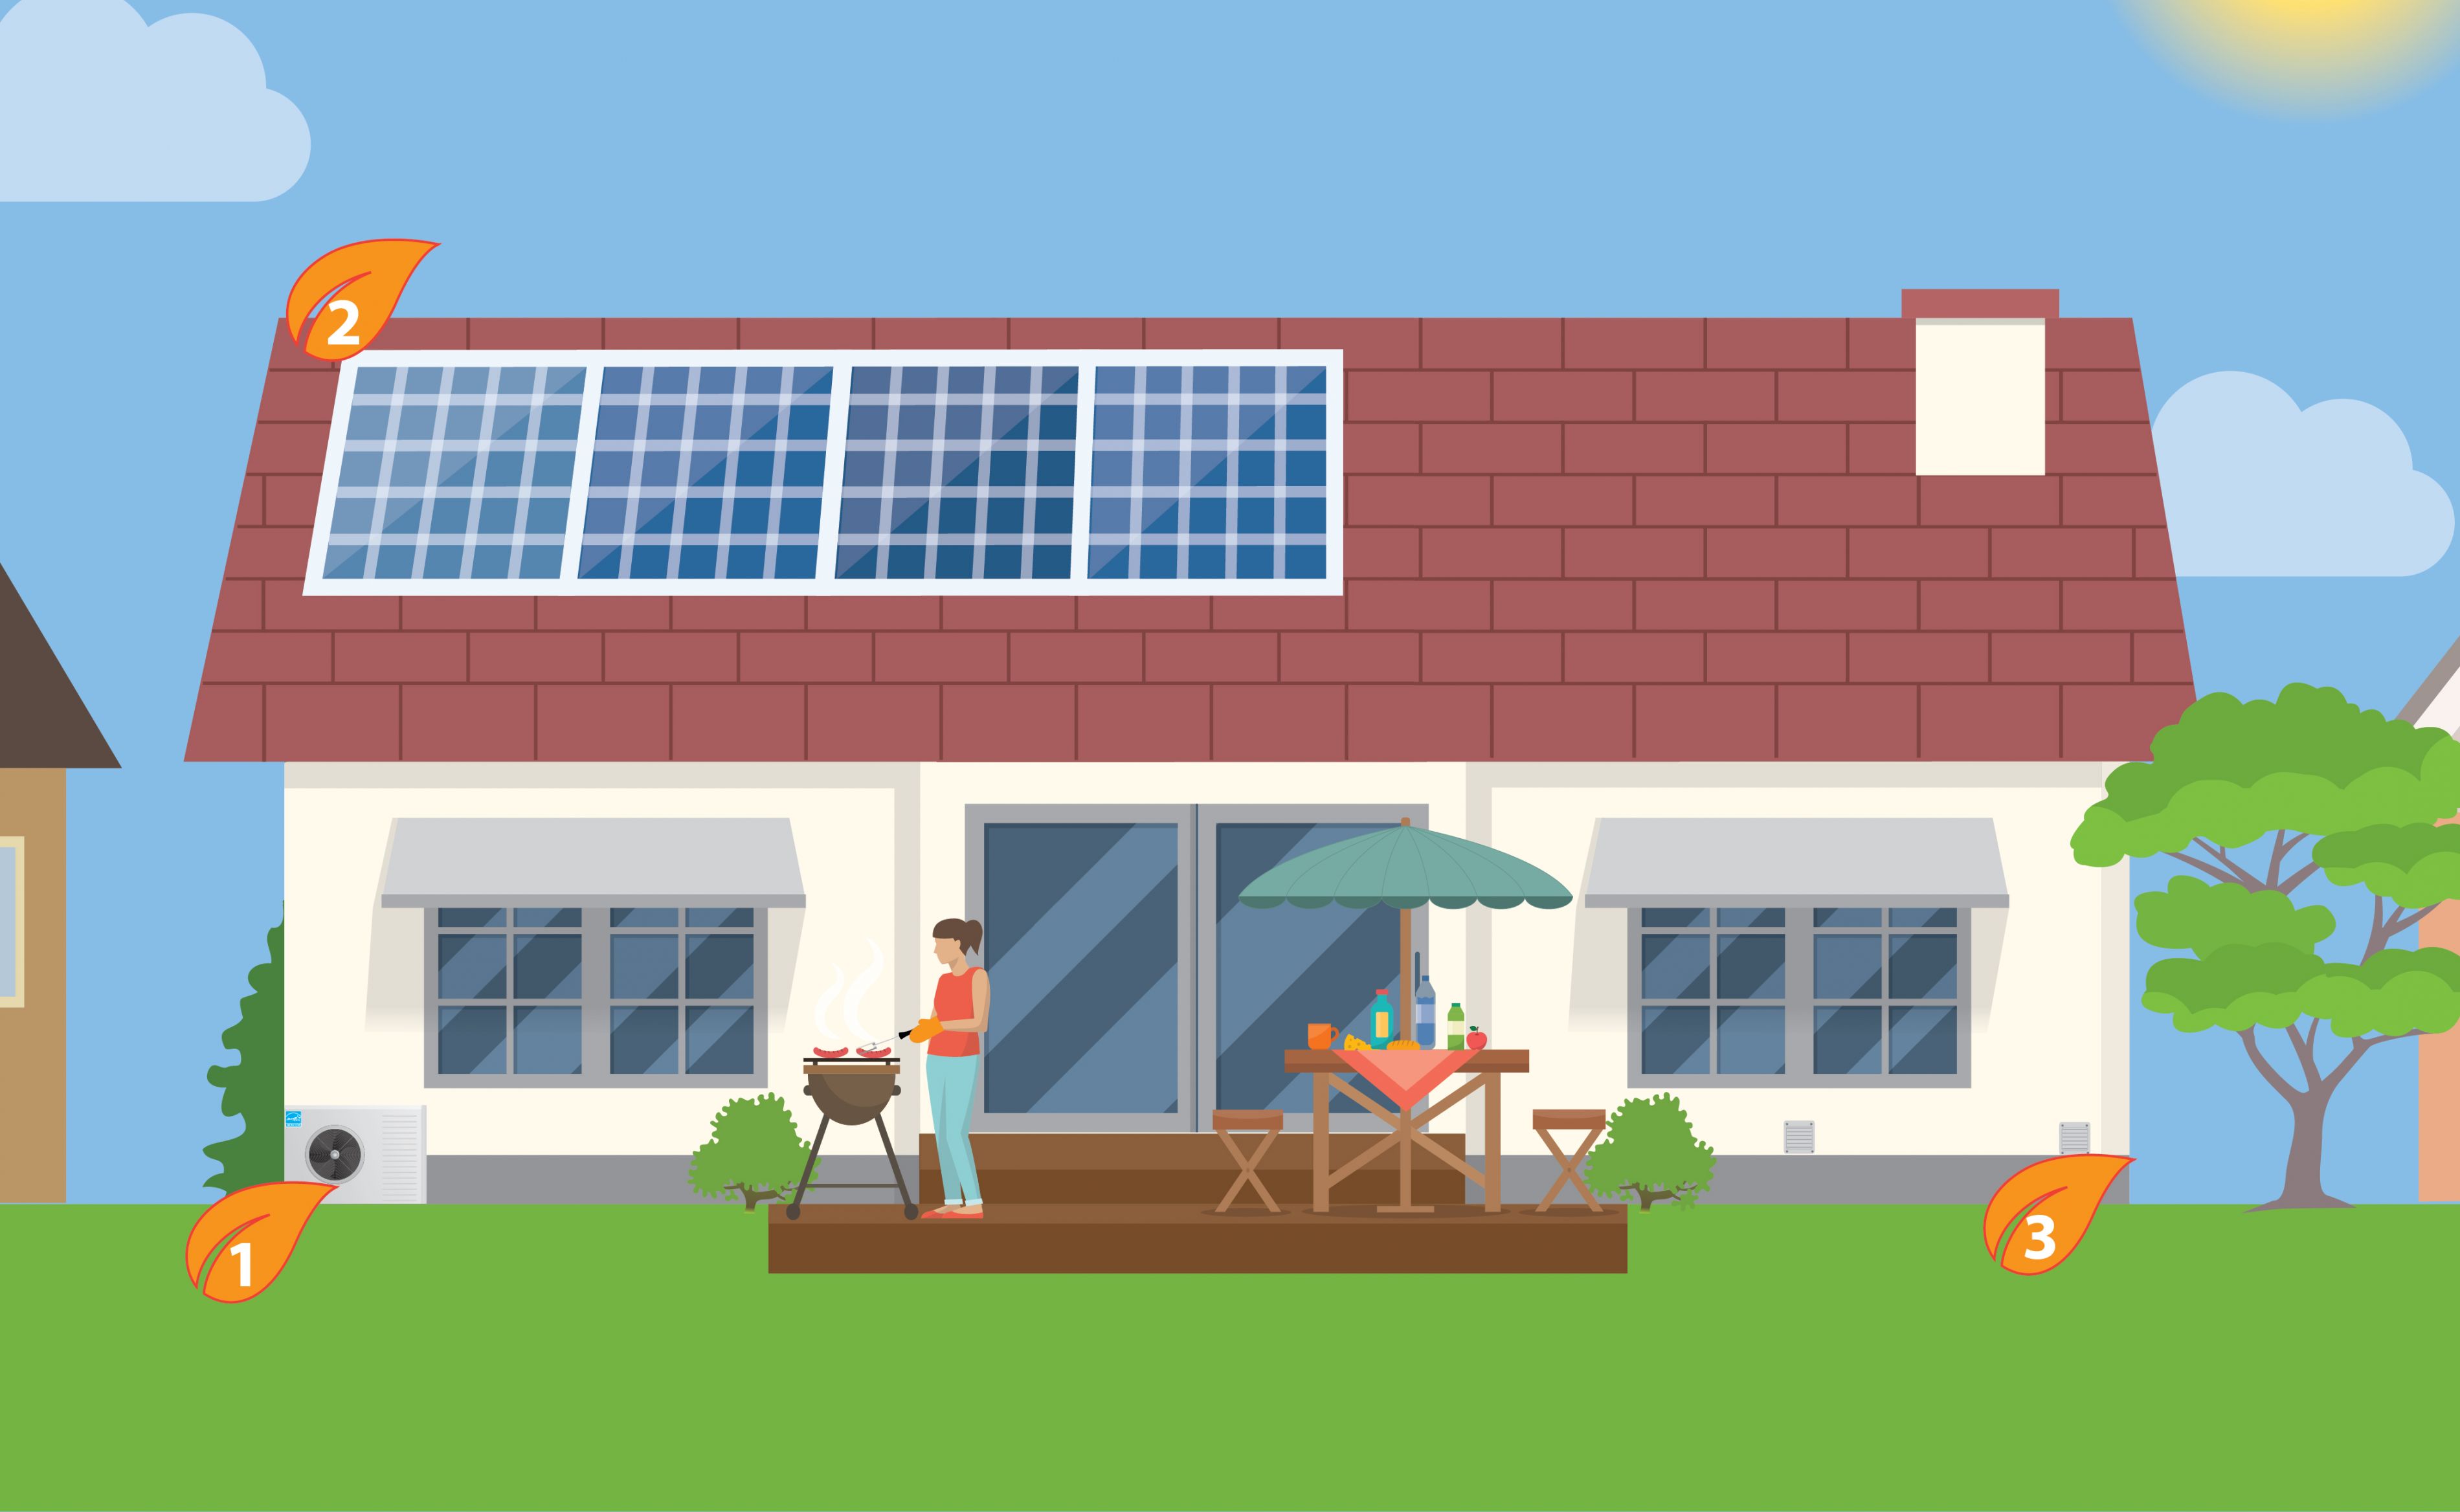 The outside of a house on a summer day with three numbers identifying different areas of the backyard. 1) An air source heat pump 2) Solar panels 3) A vent